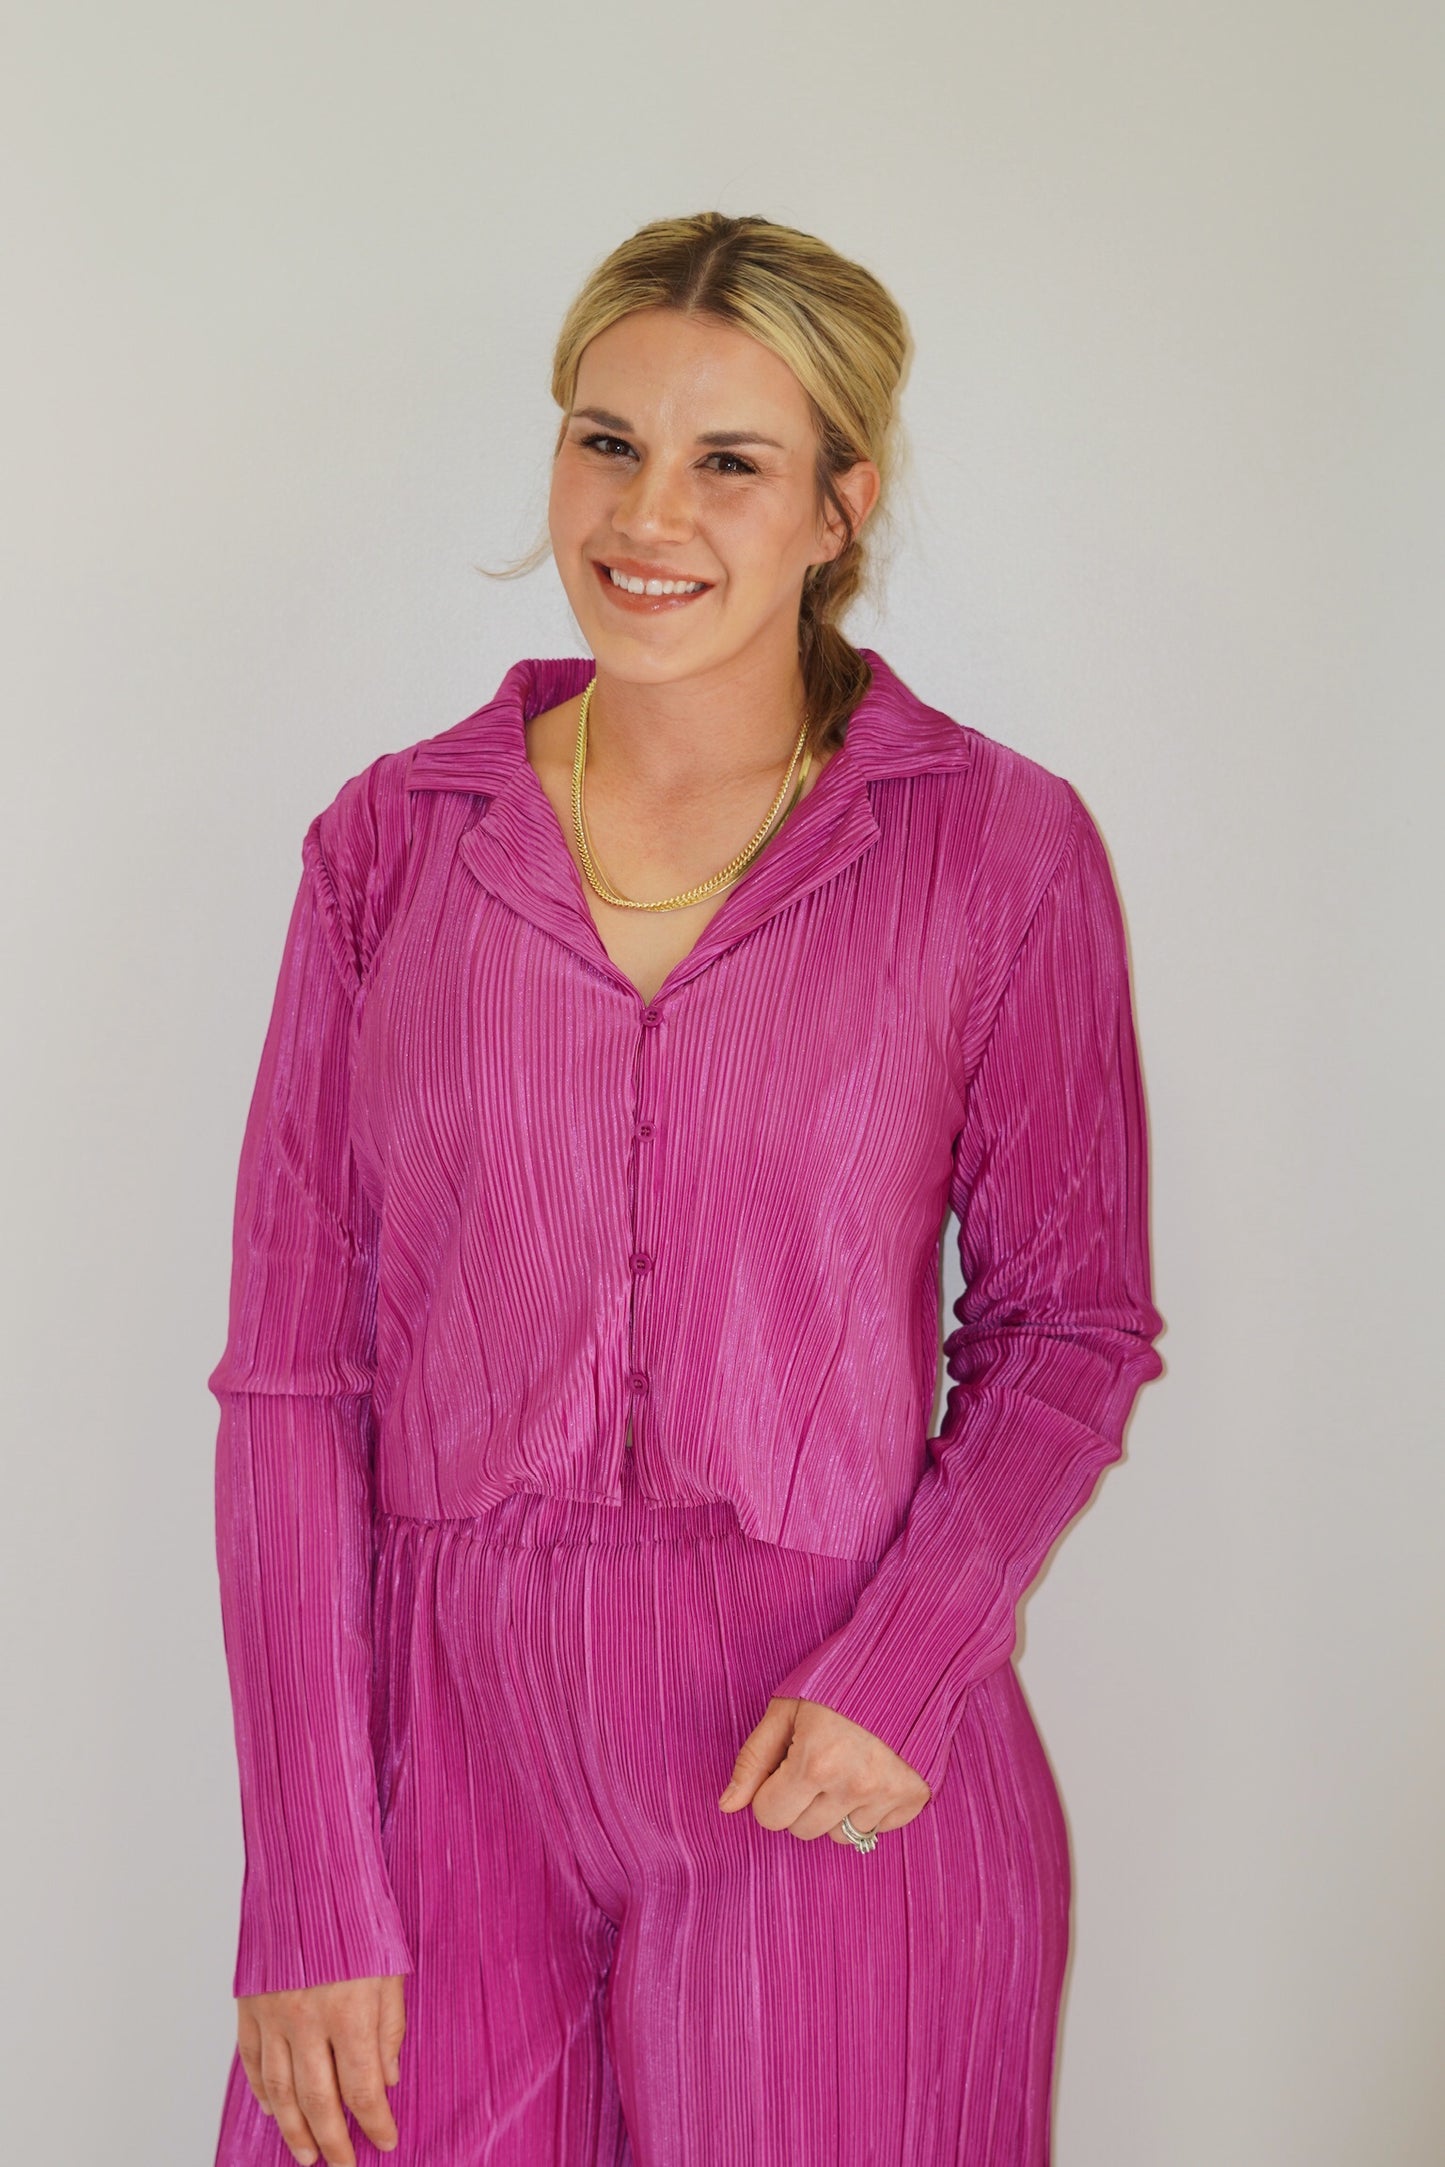 Shelly Cropped Satin Button Up Collar Neck Raw Hem sleeve Pleated material, magenta color Cropped button up 100% Polyester Hand wash cold, do not bleach. Hang or line dry. Model is wearing size large